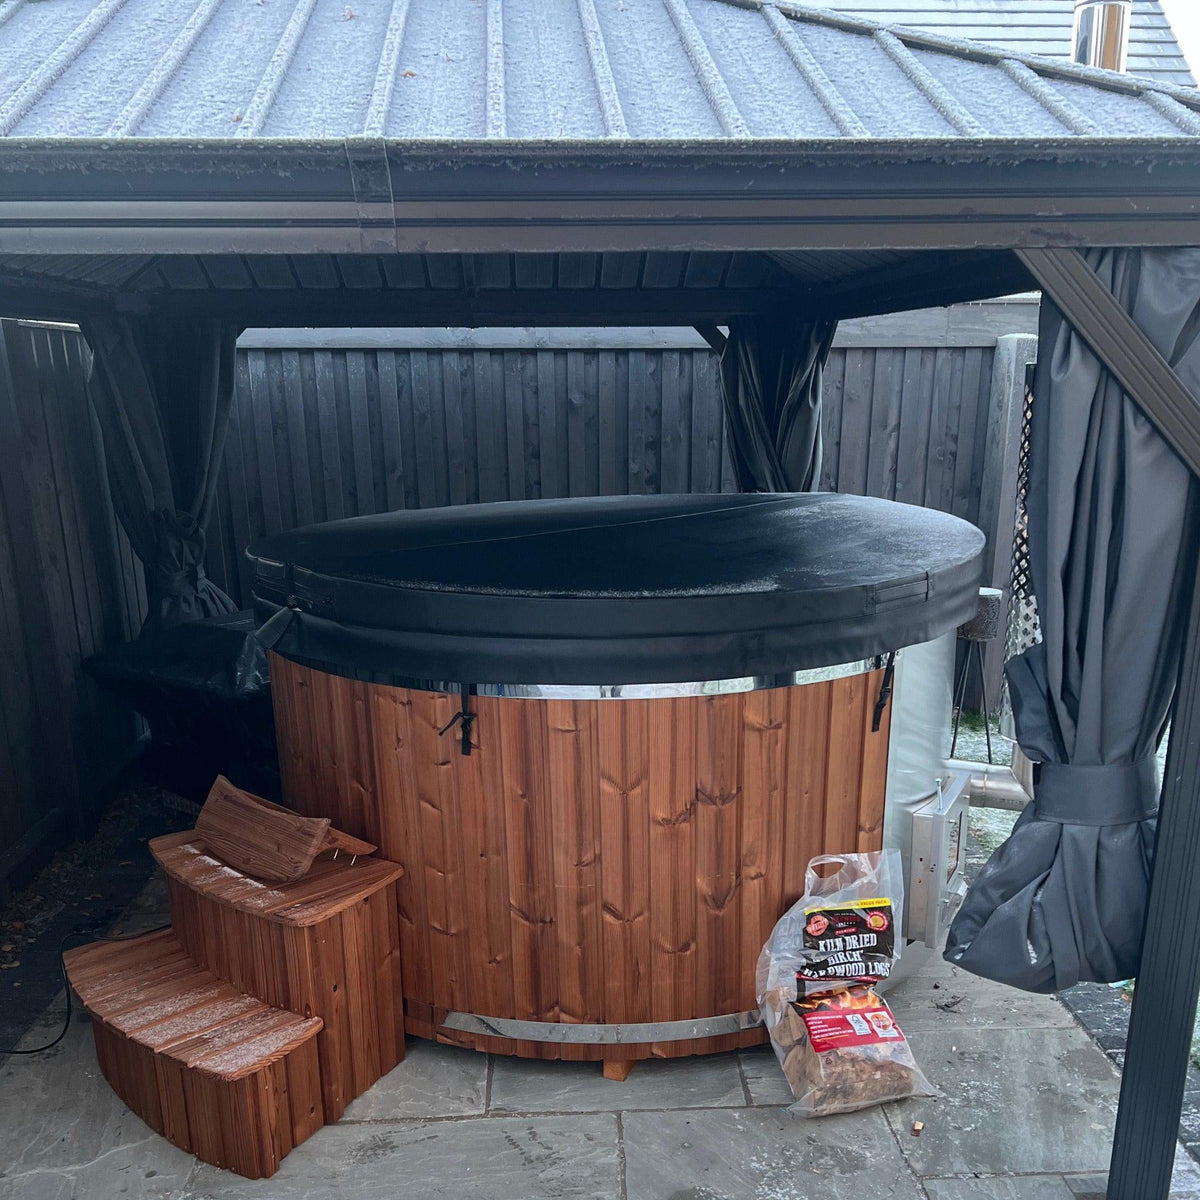 Large 200cm Wood Fired Hot Tub, Integrated Heater, Fibreglass liner.